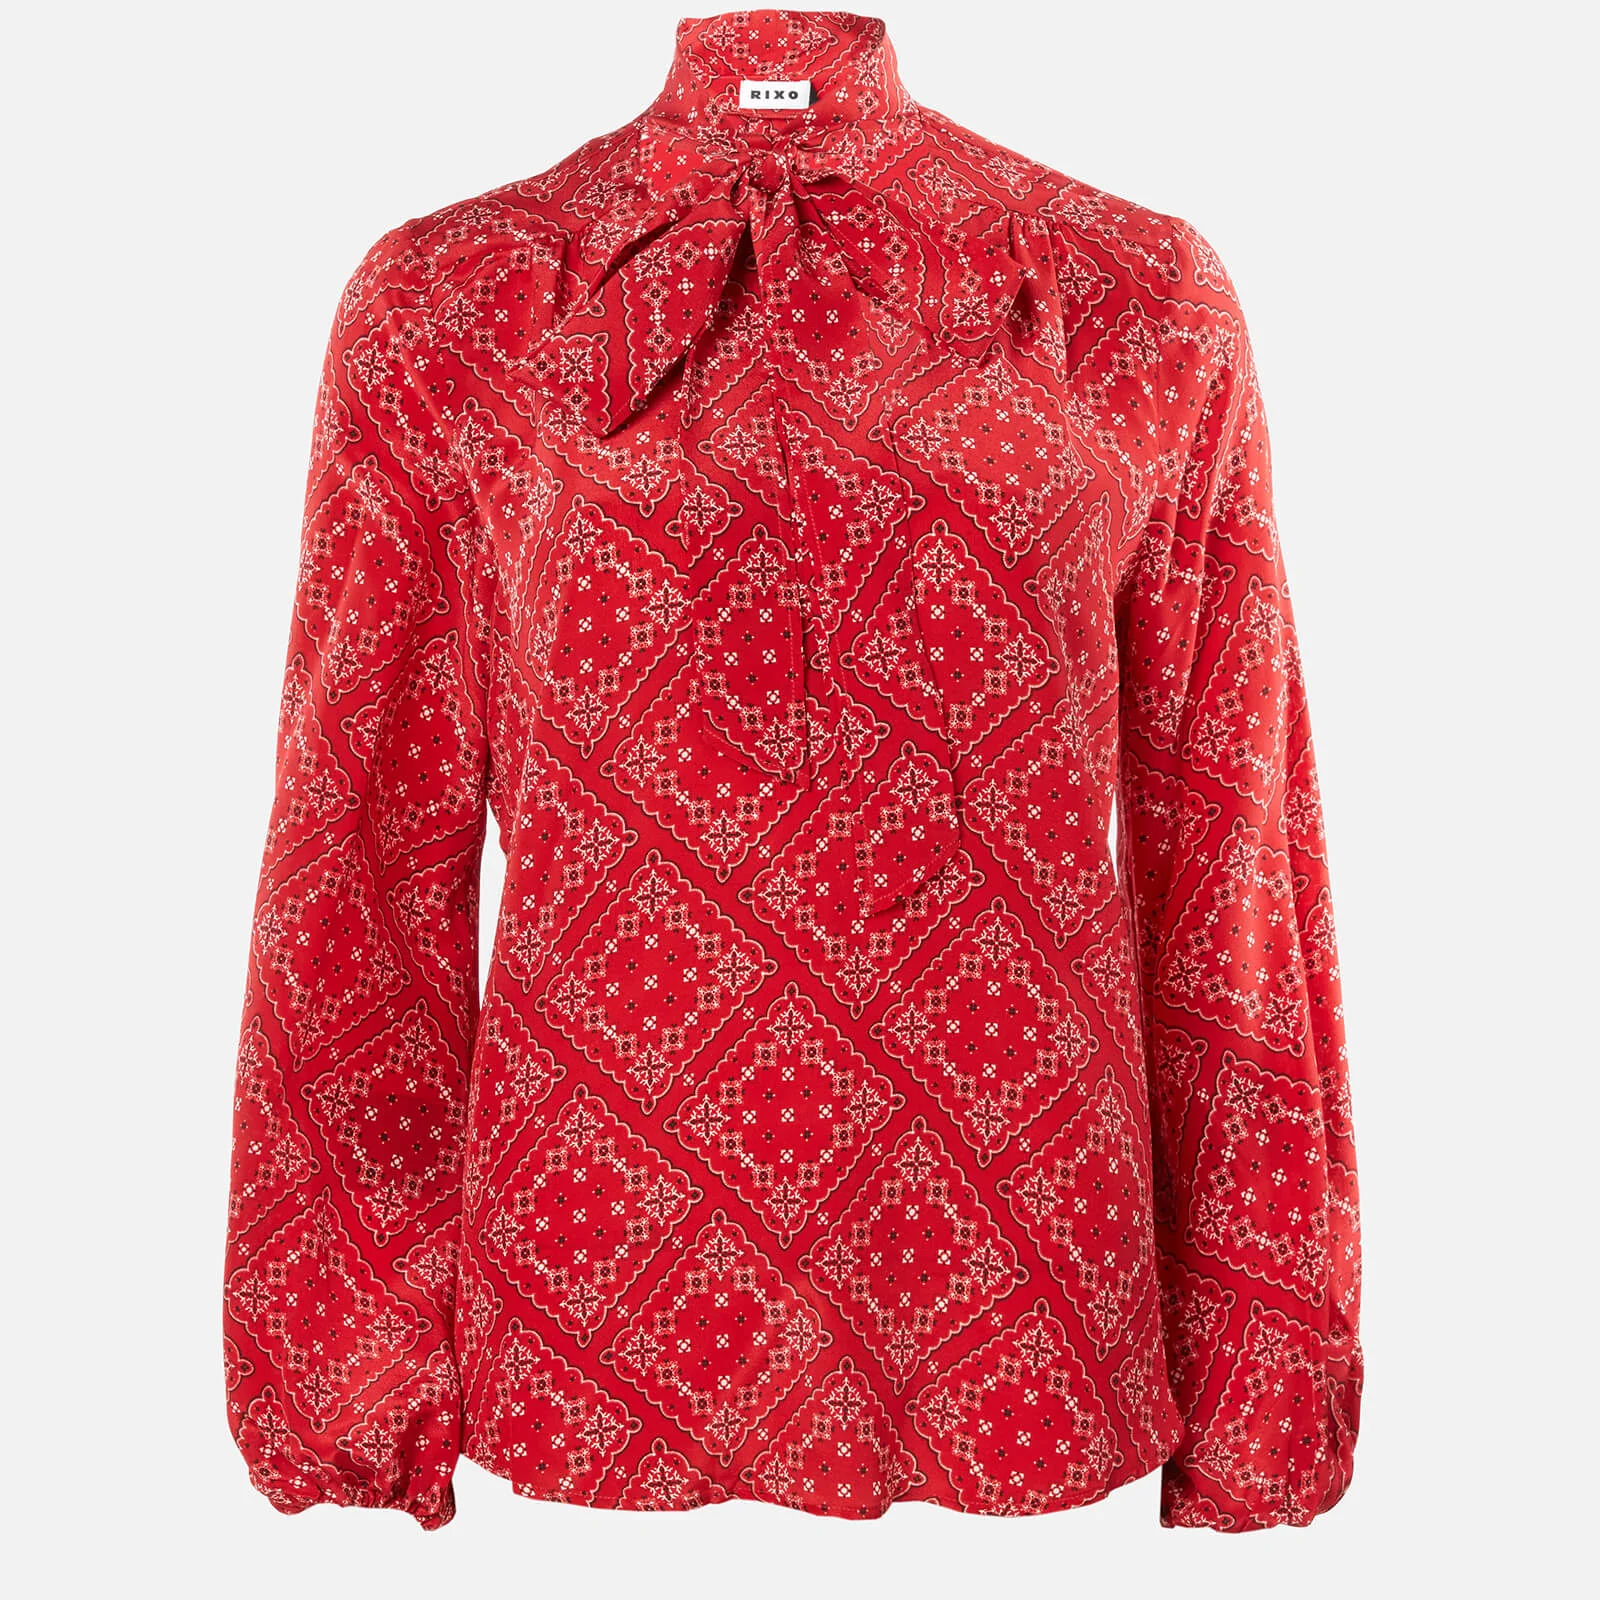 RIXO Women's Moss Blouse - Scarf Floral Red Image 1